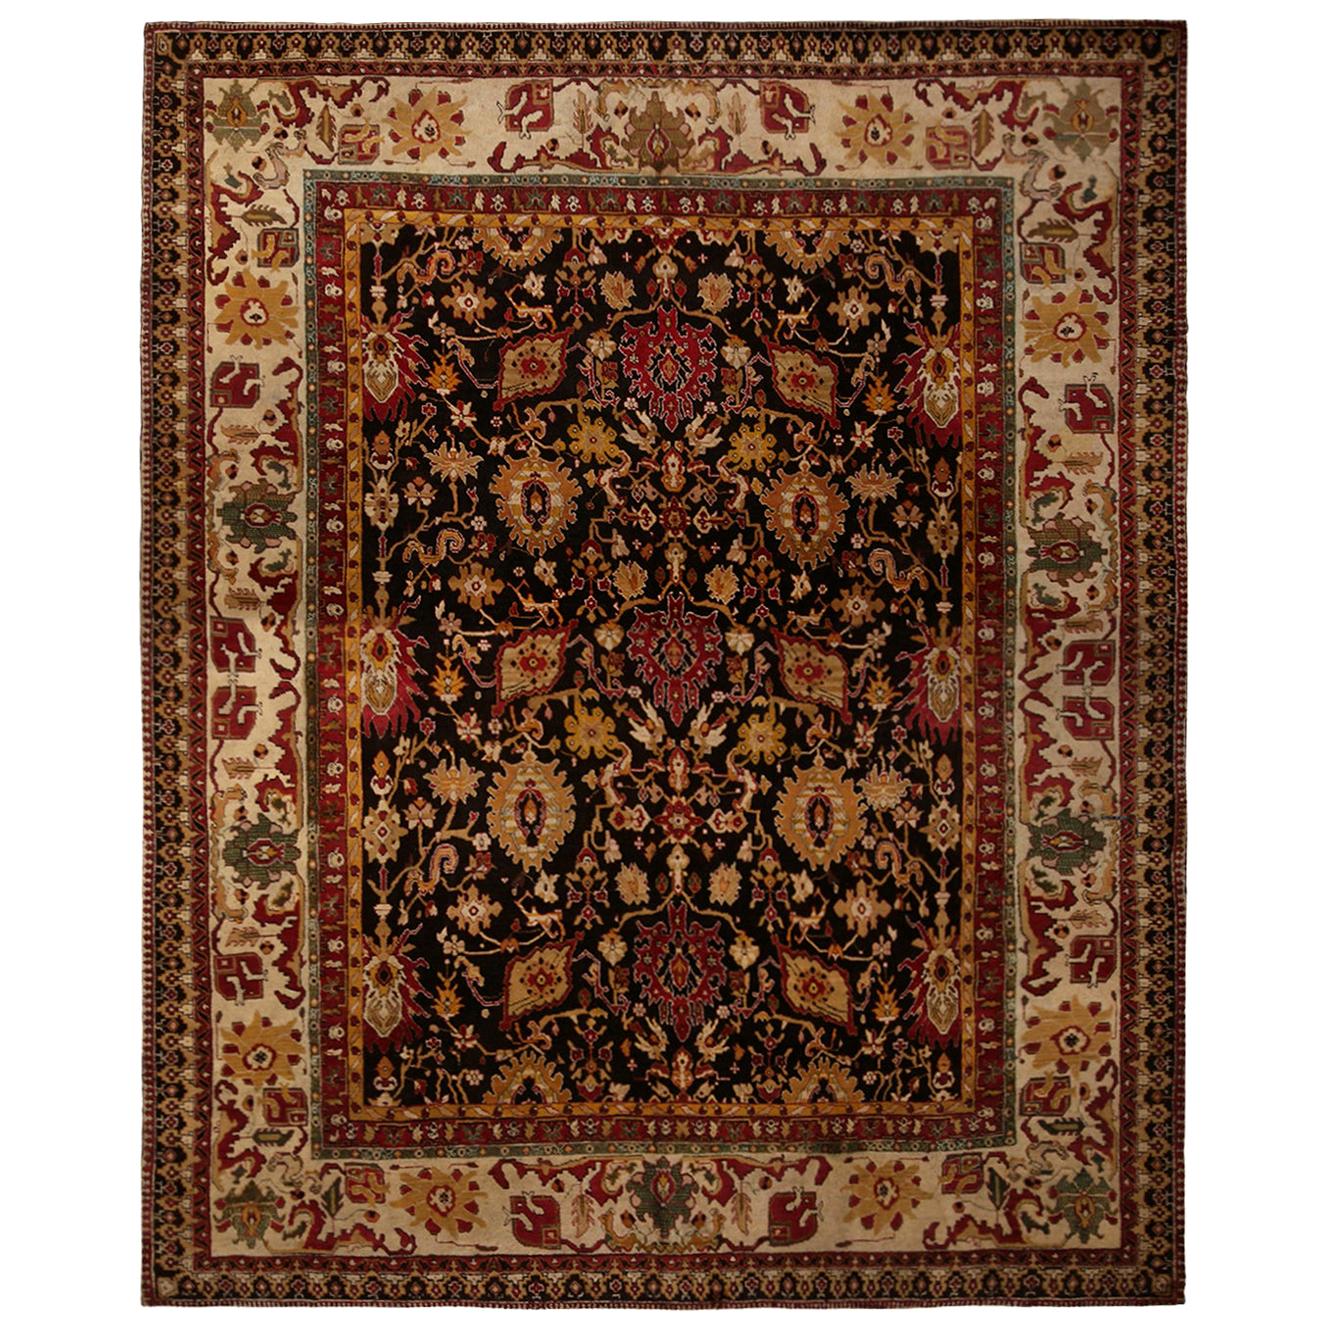 Antique Agra Red and Gold Wool Rug